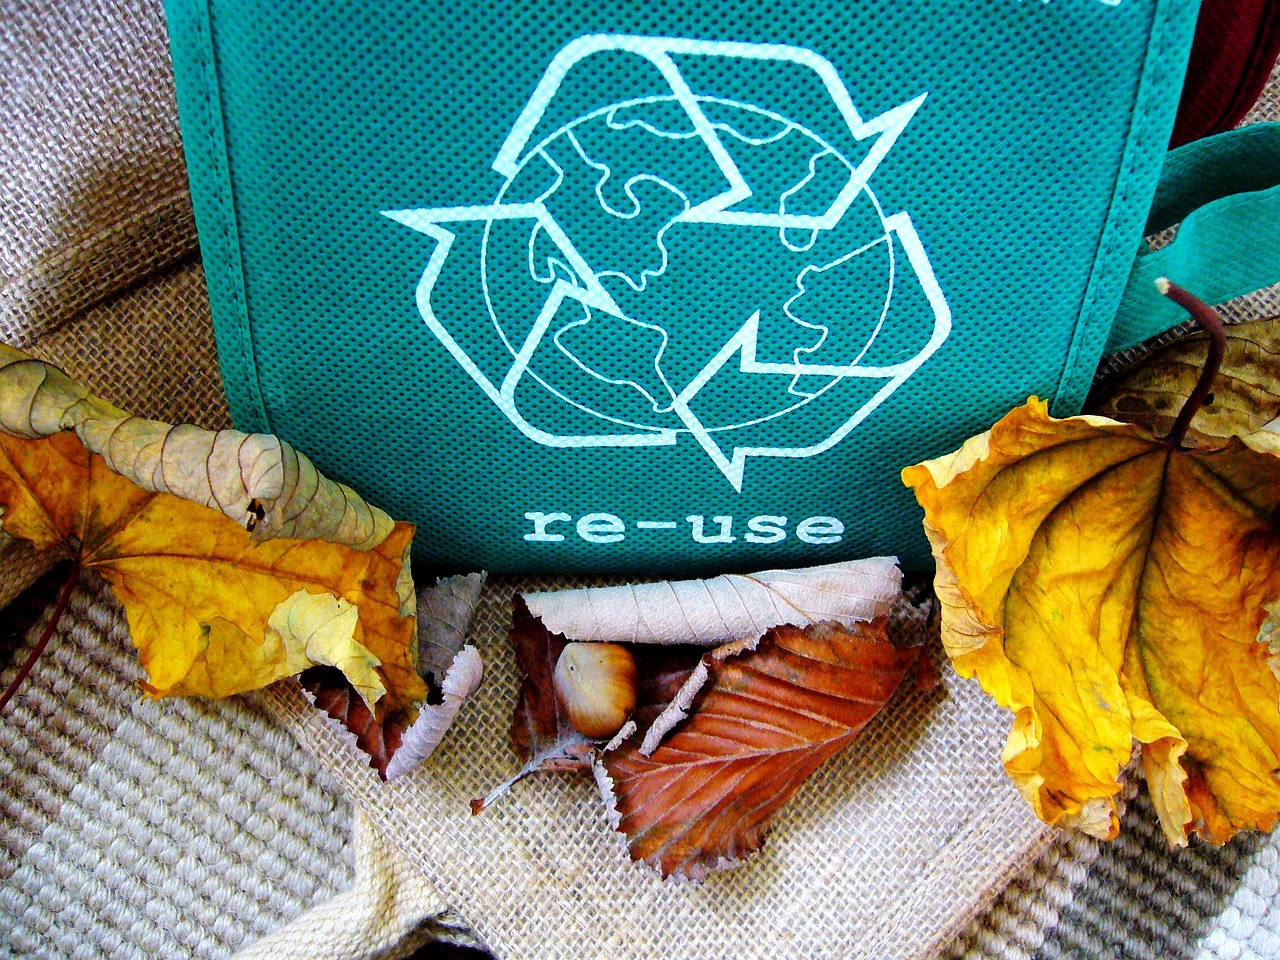 Facts About Recycling:  15 Simple Facts You Probably Didn’t Know